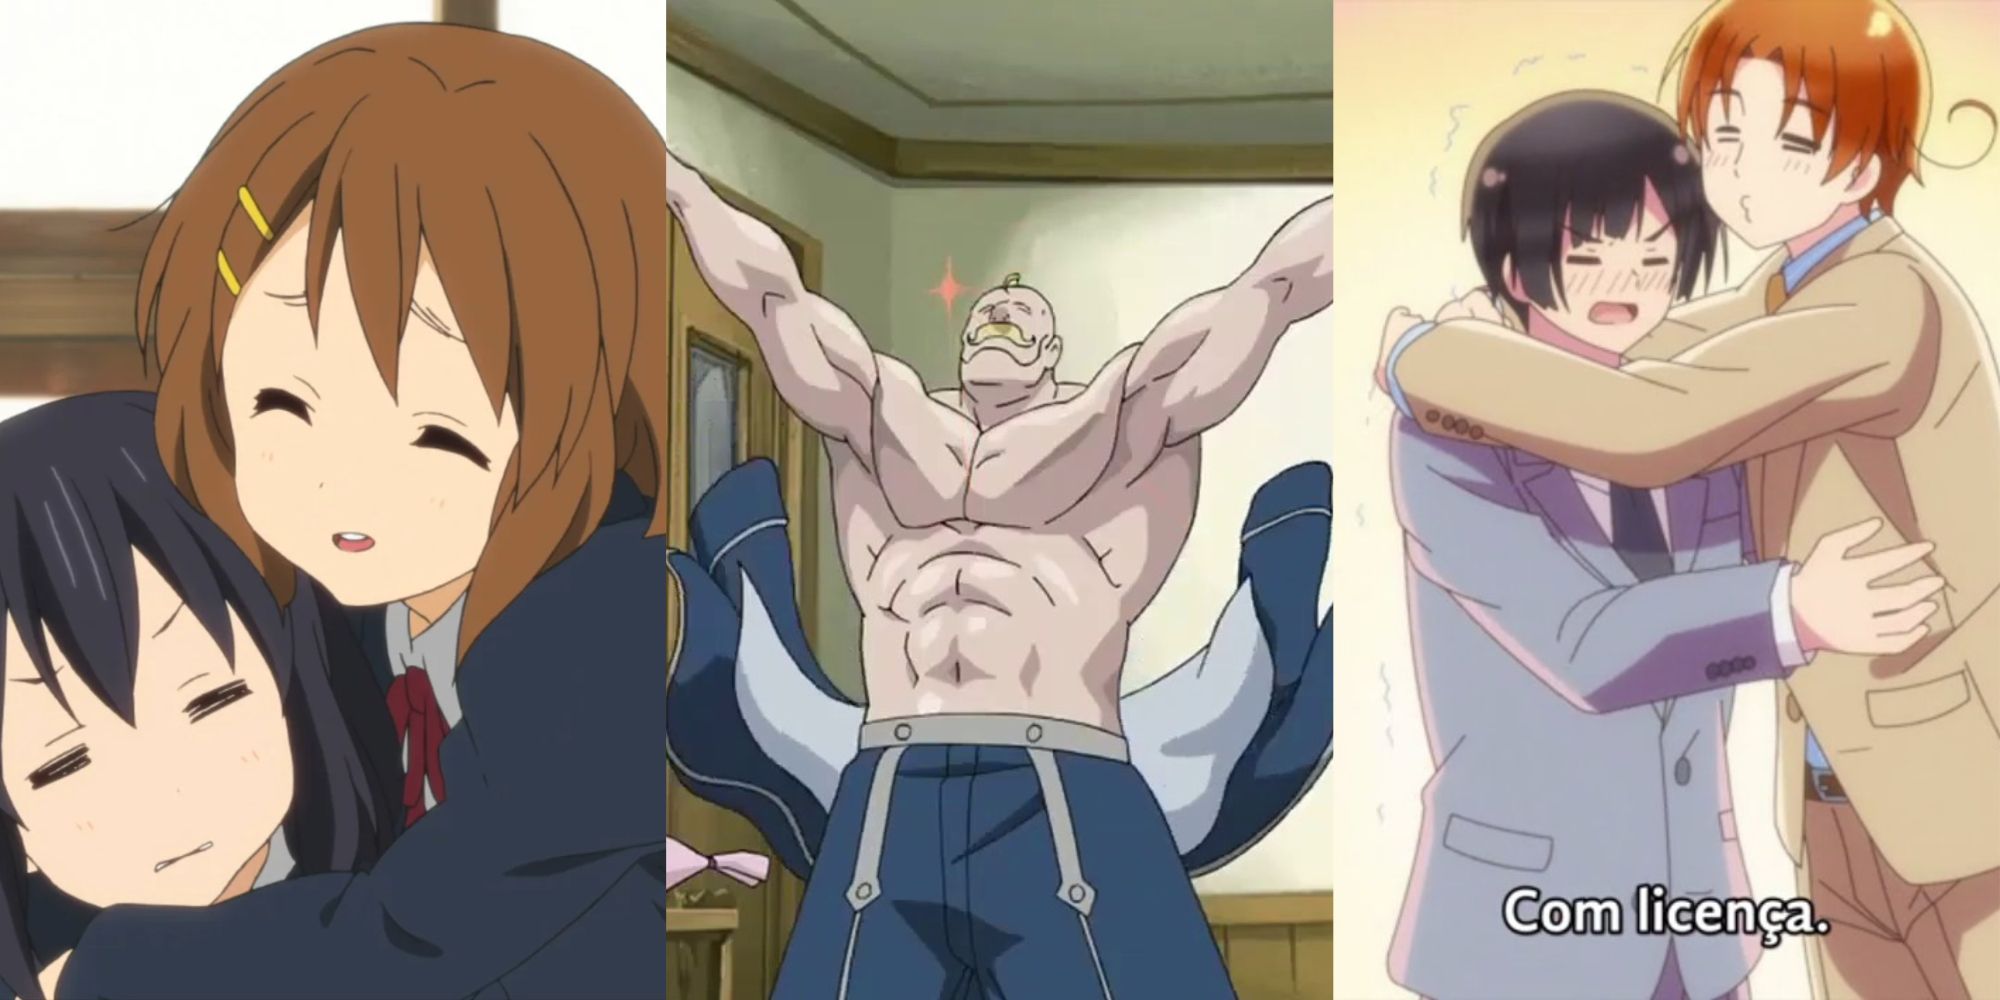 Yui is hugging Azusa, Armstrong has taken his shirt off to hug Ed, Italy is hugging Japan